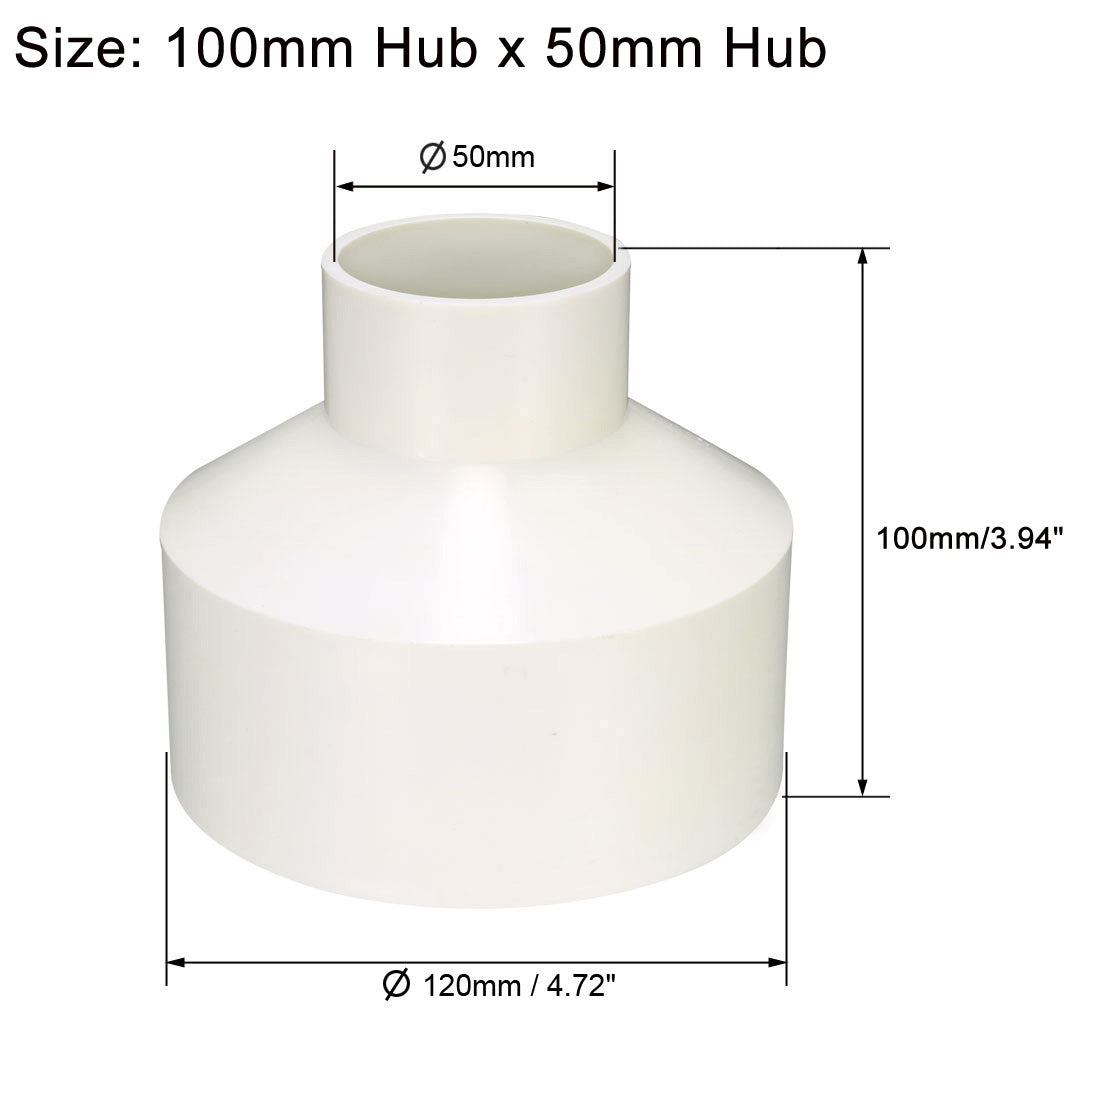 uxcell Uxcell 110mm x 50mm PVC Reducing Coupling Hub by Hub Pipe Fitting Adapter Connector